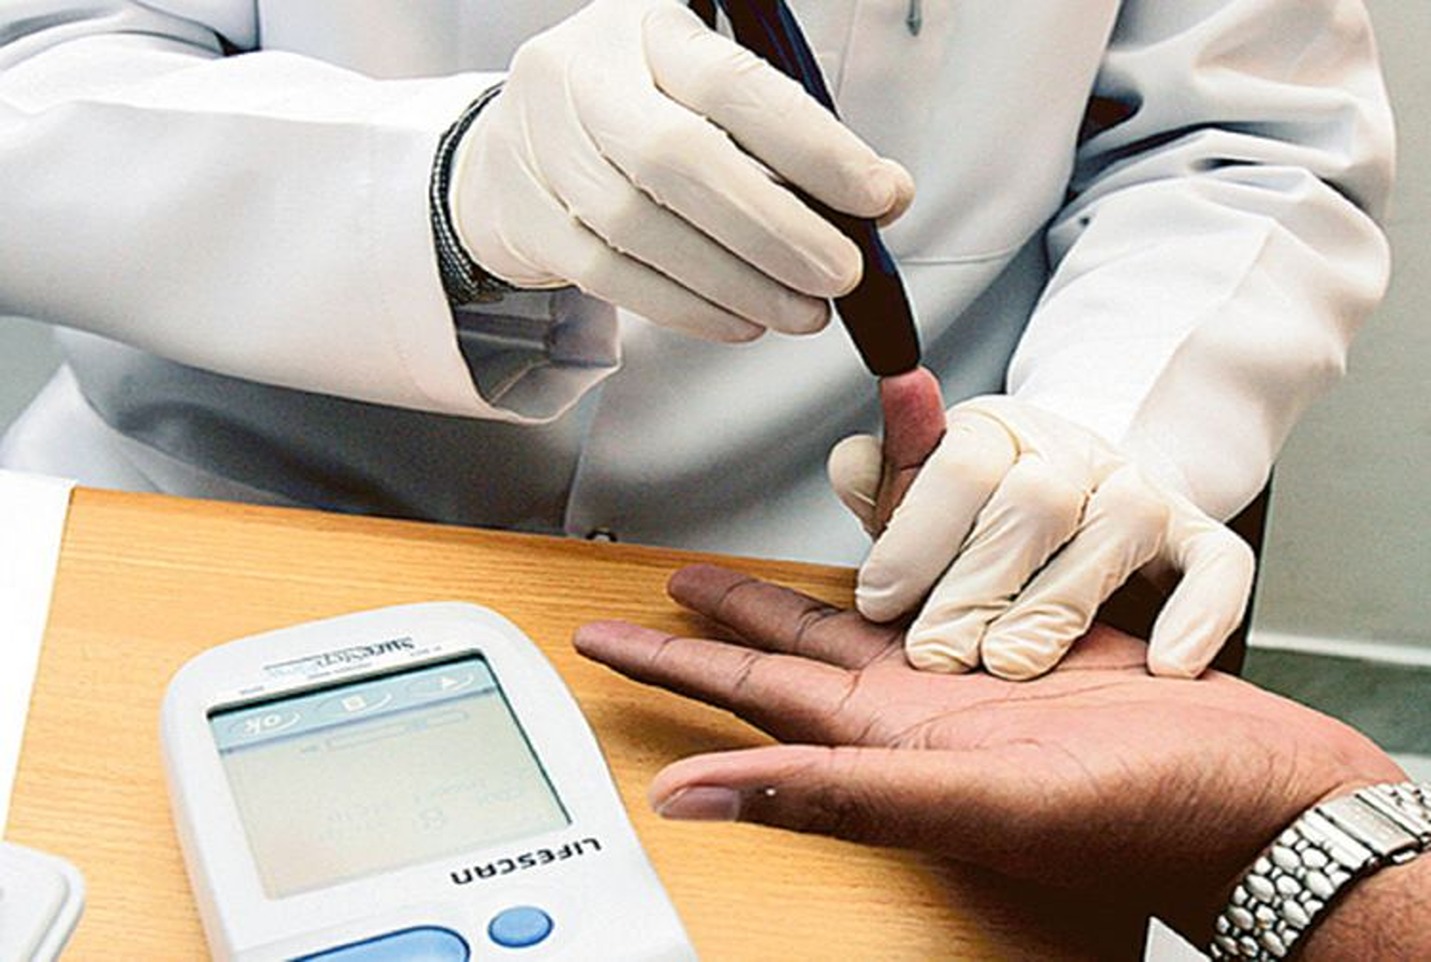 World Diabetes Day: UAE doctors highlight rise in cases with atypical symptoms